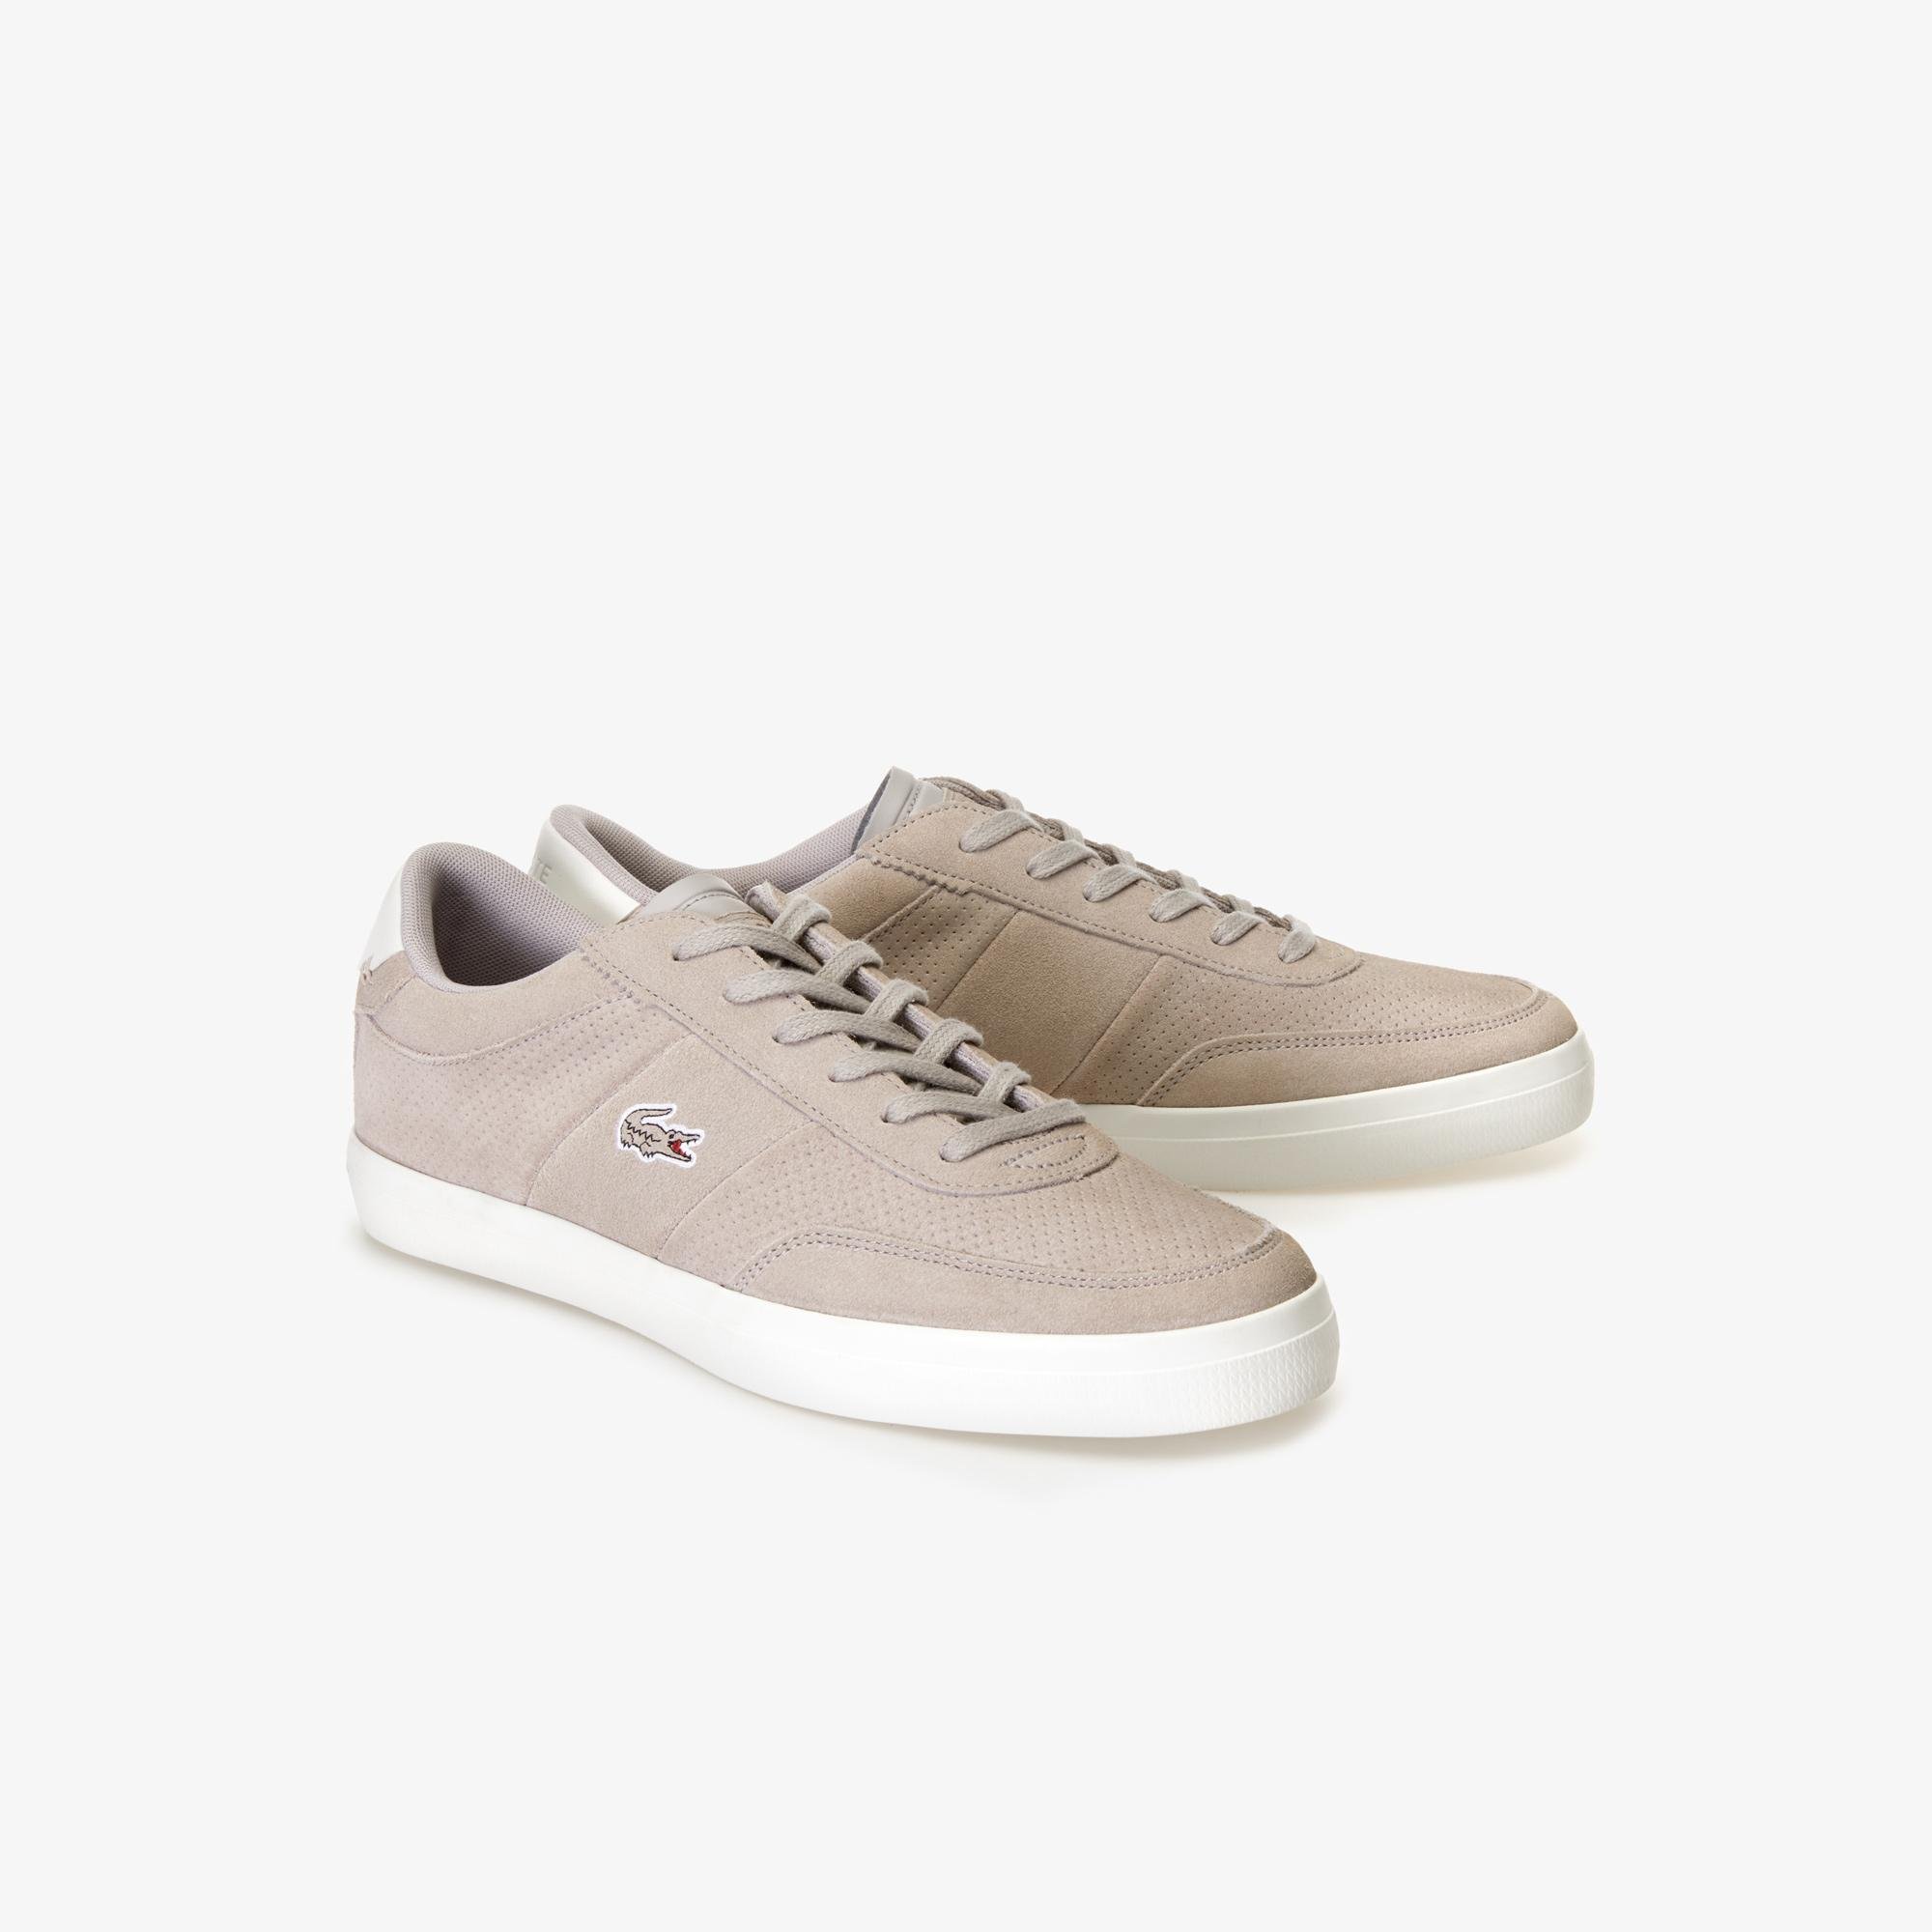 Lacoste Court-Master 119 3 Men's Trainers